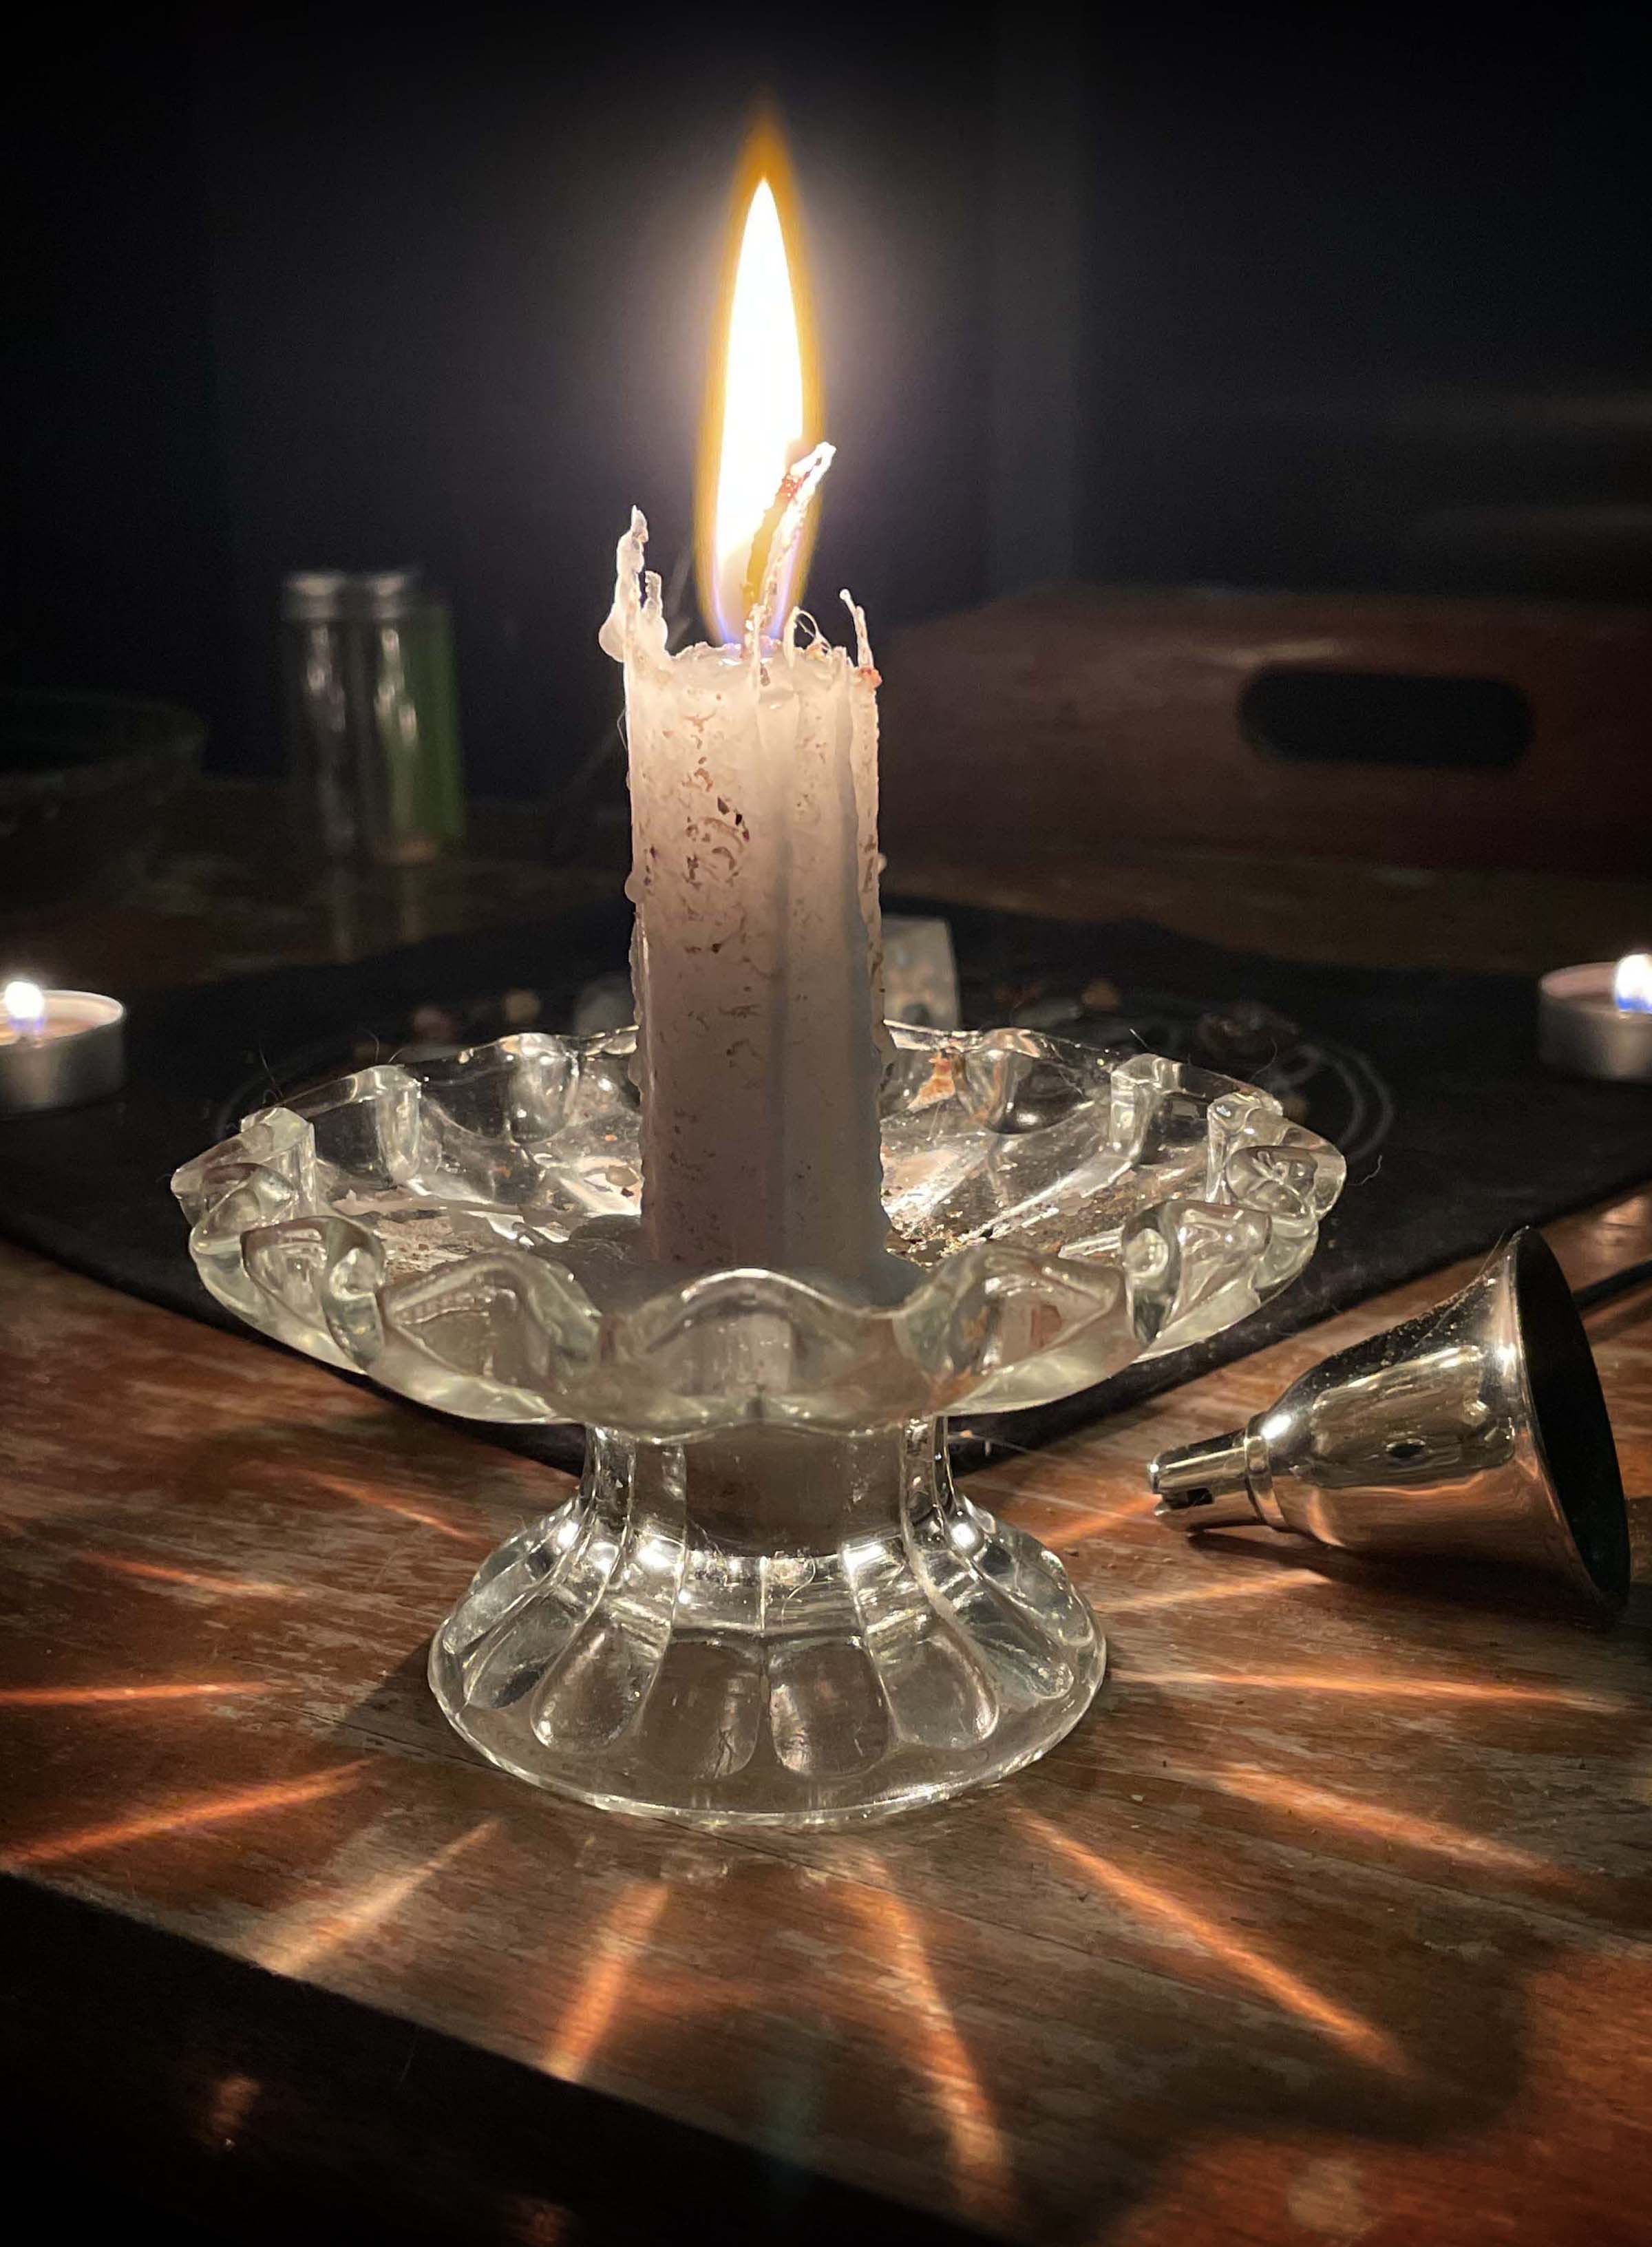 A single white candle glows in a darkened room, hiding the crystal grid behind it.